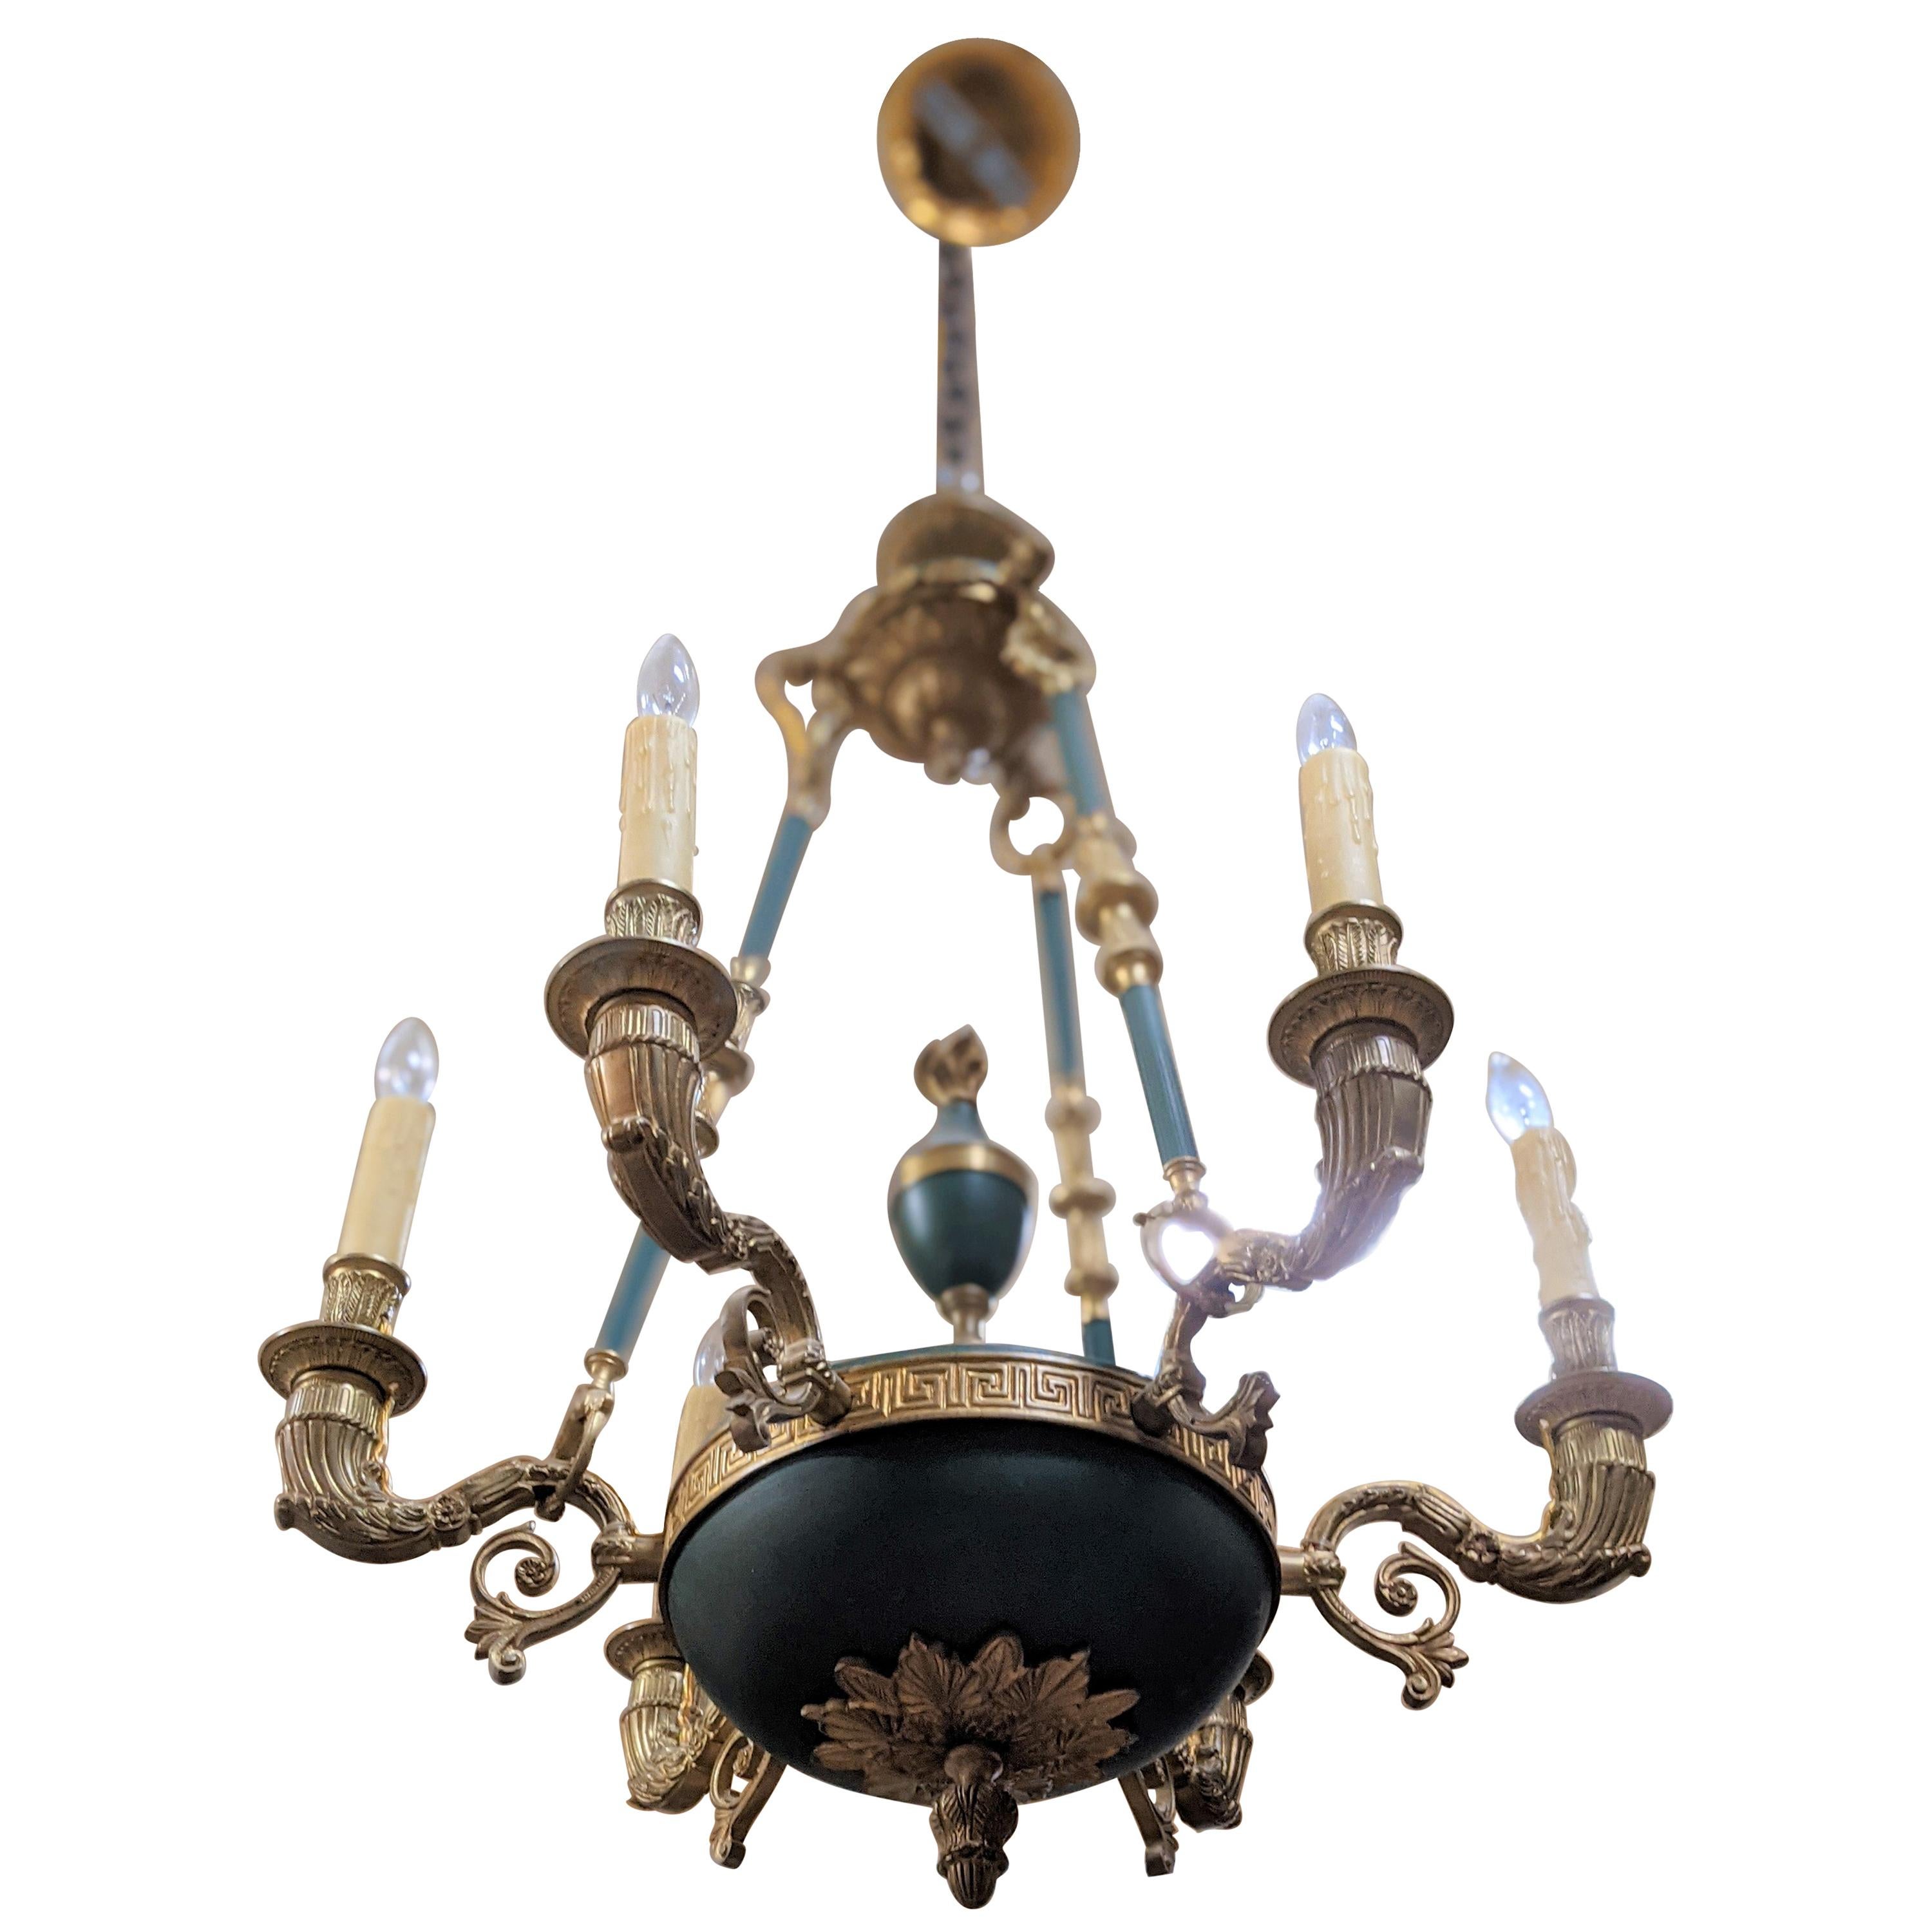 19th Century Bronze Chandelier "Empire Style" from France